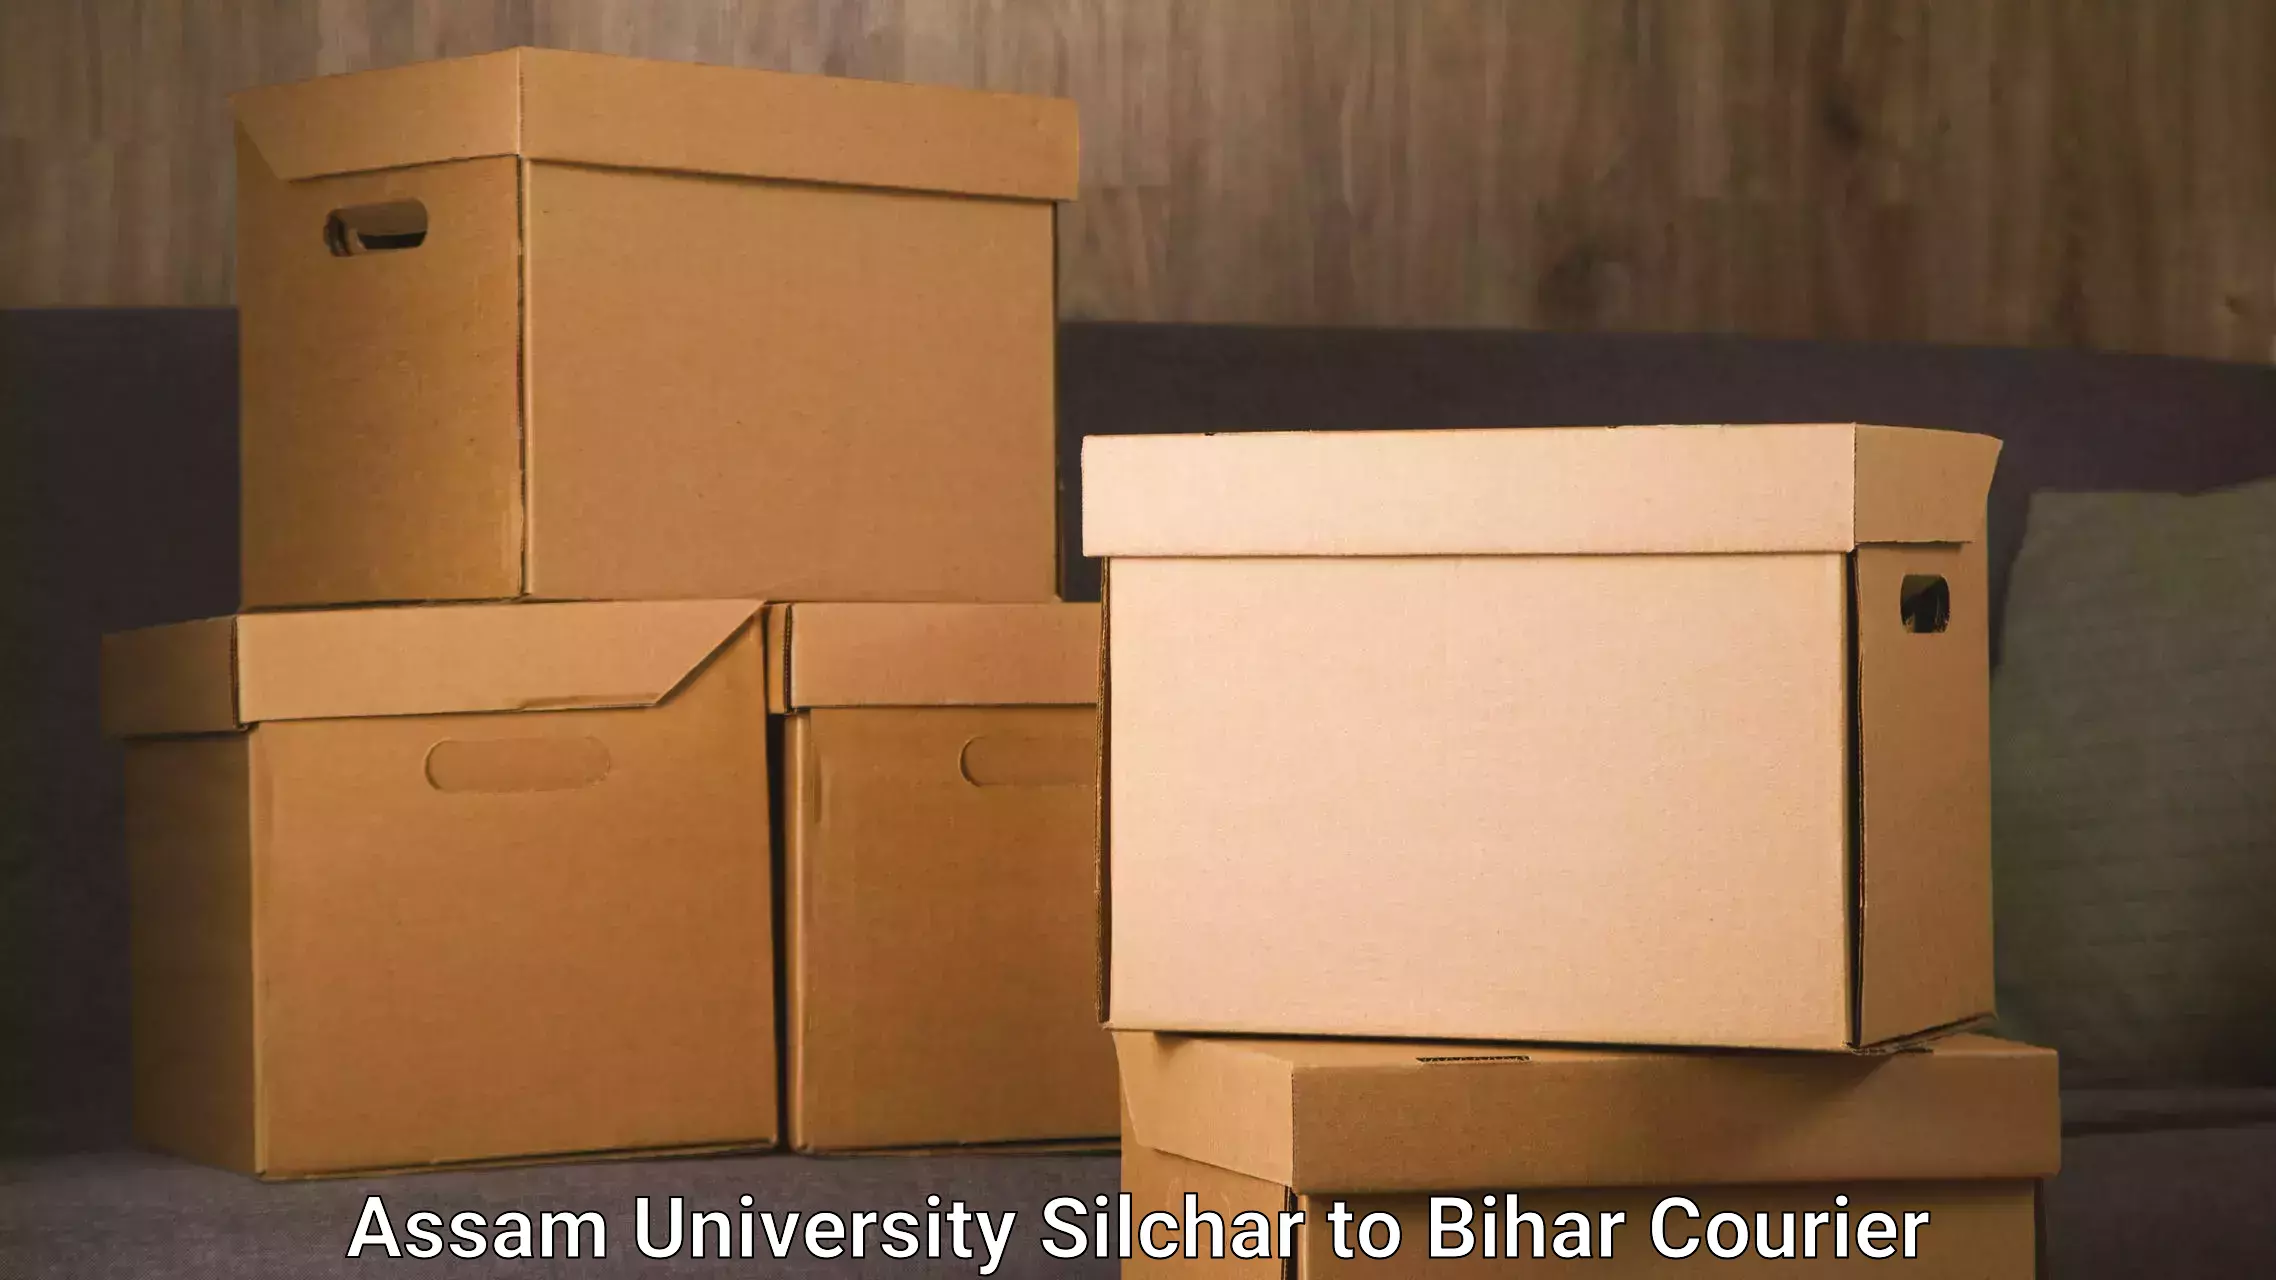 Courier rate comparison in Assam University Silchar to Sherghati